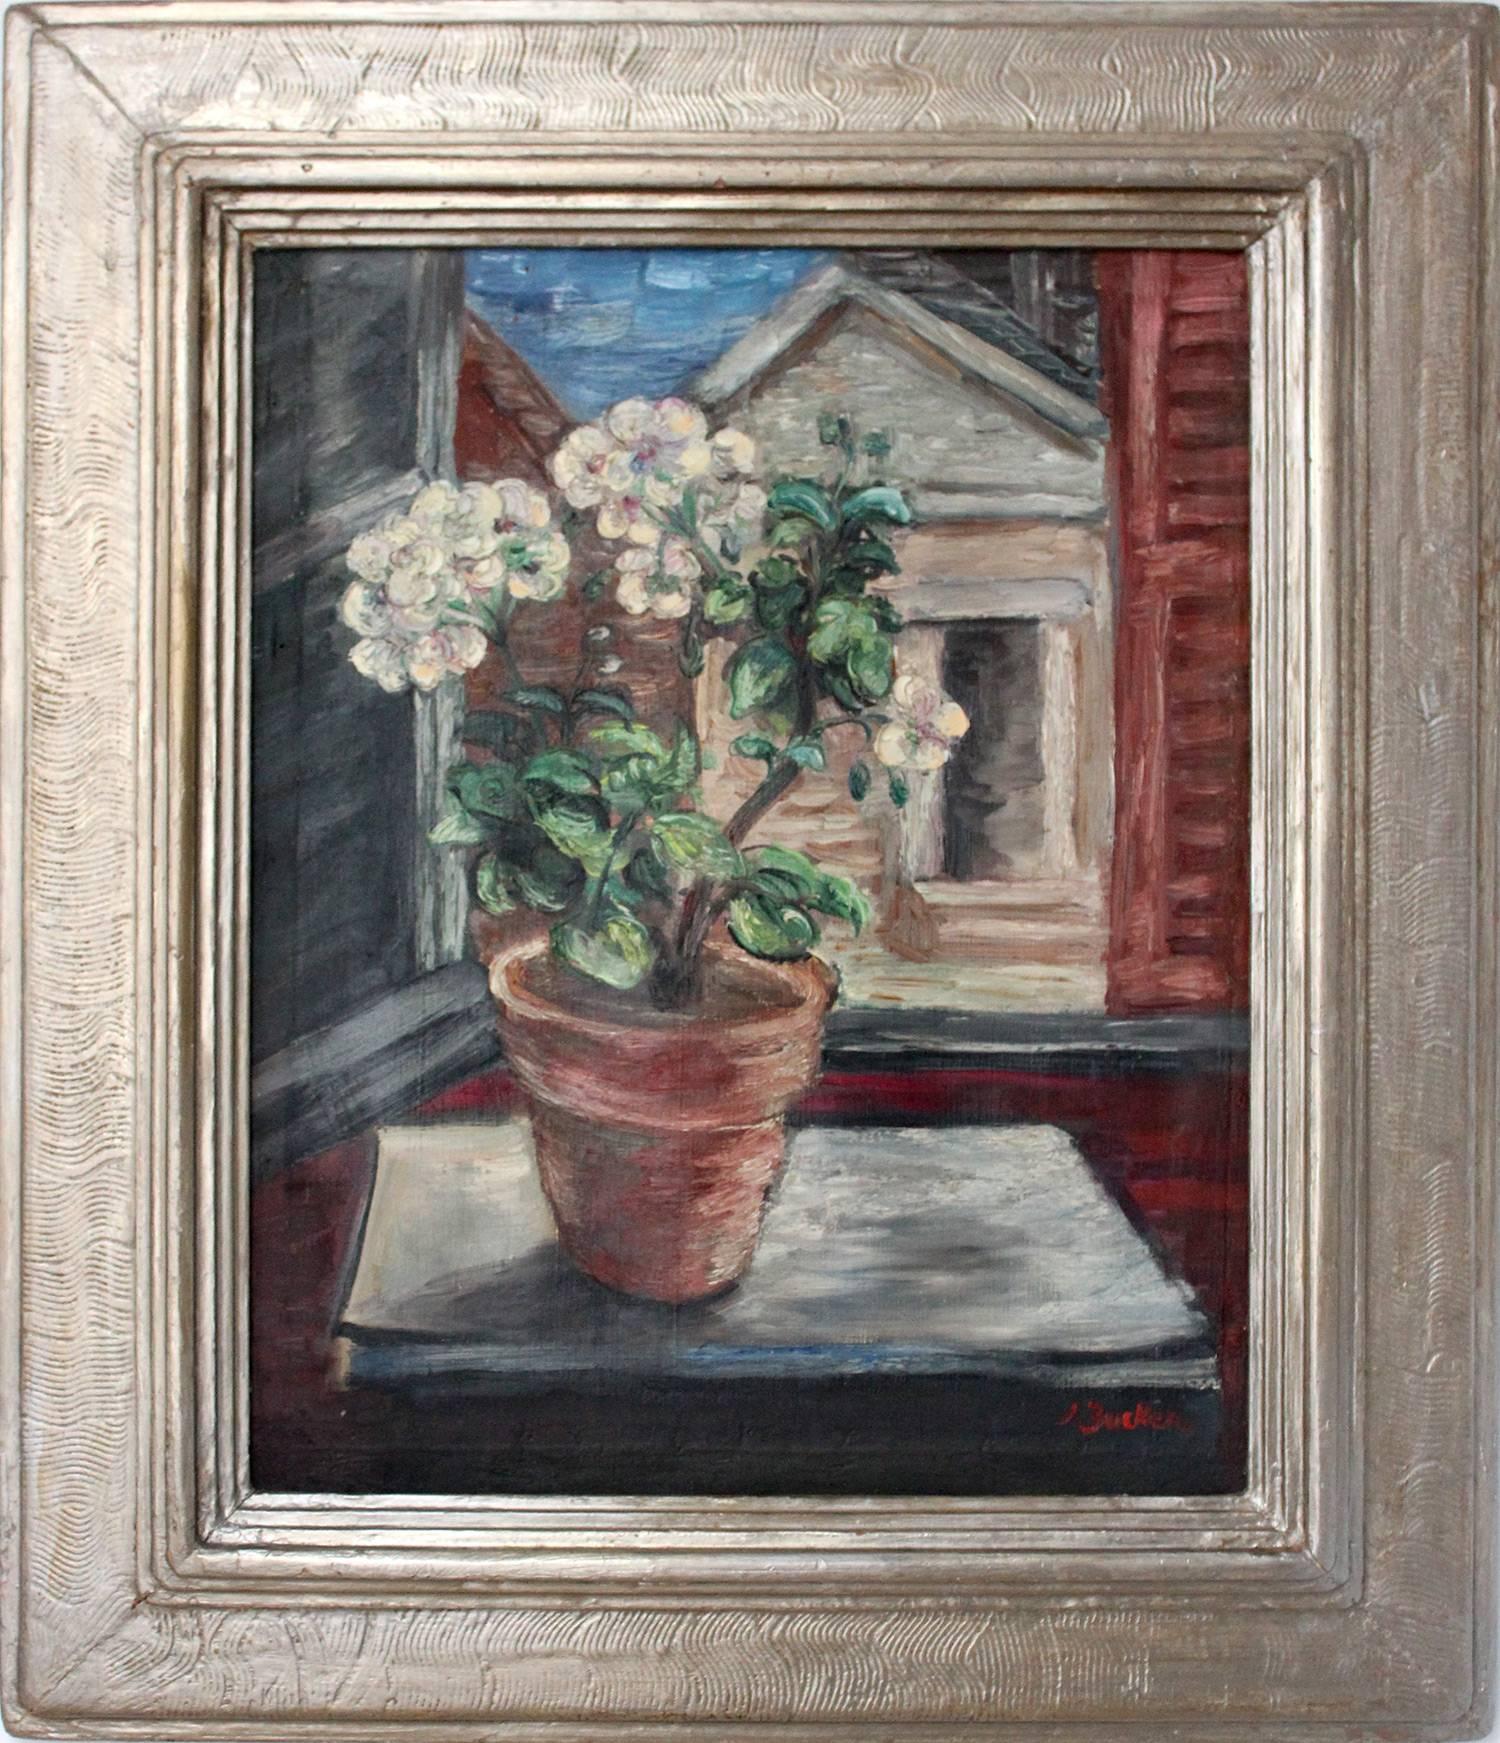 "Flower Pot by the Window" 20th Century Impressionistic Oil Painting on Canvas